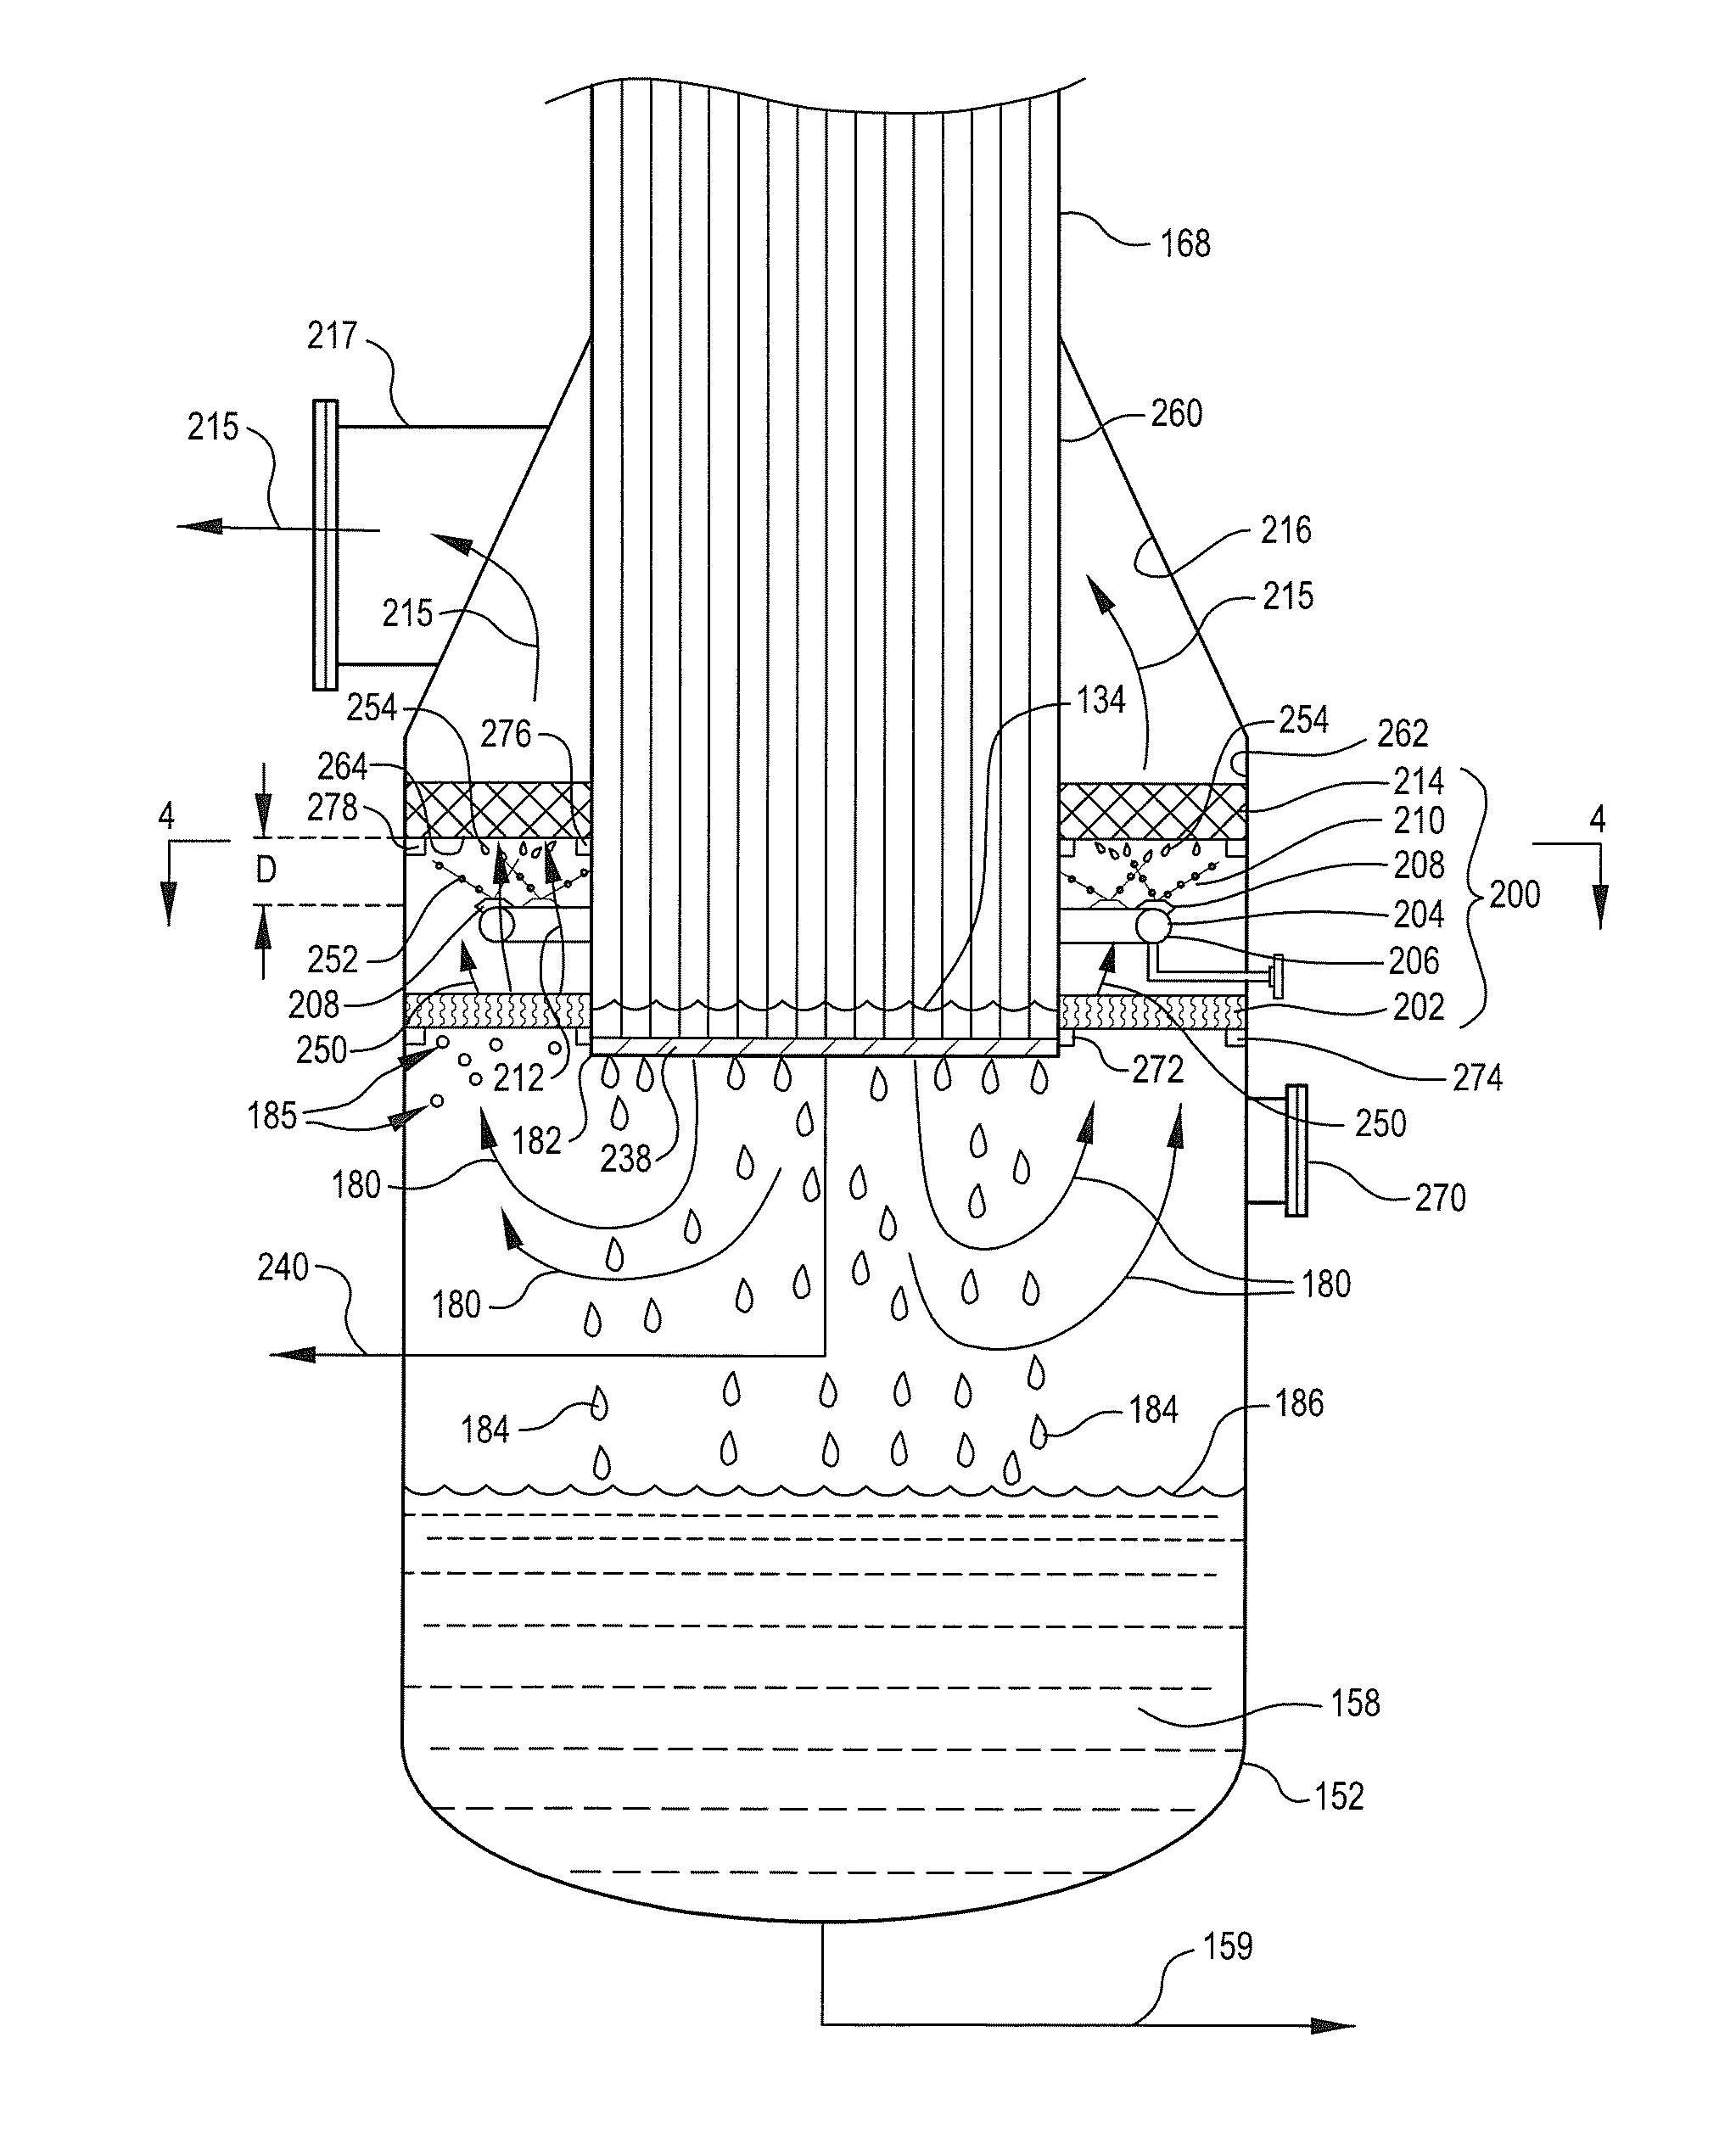 Method and apparatus for reduction of contaminants in evaporator distillate